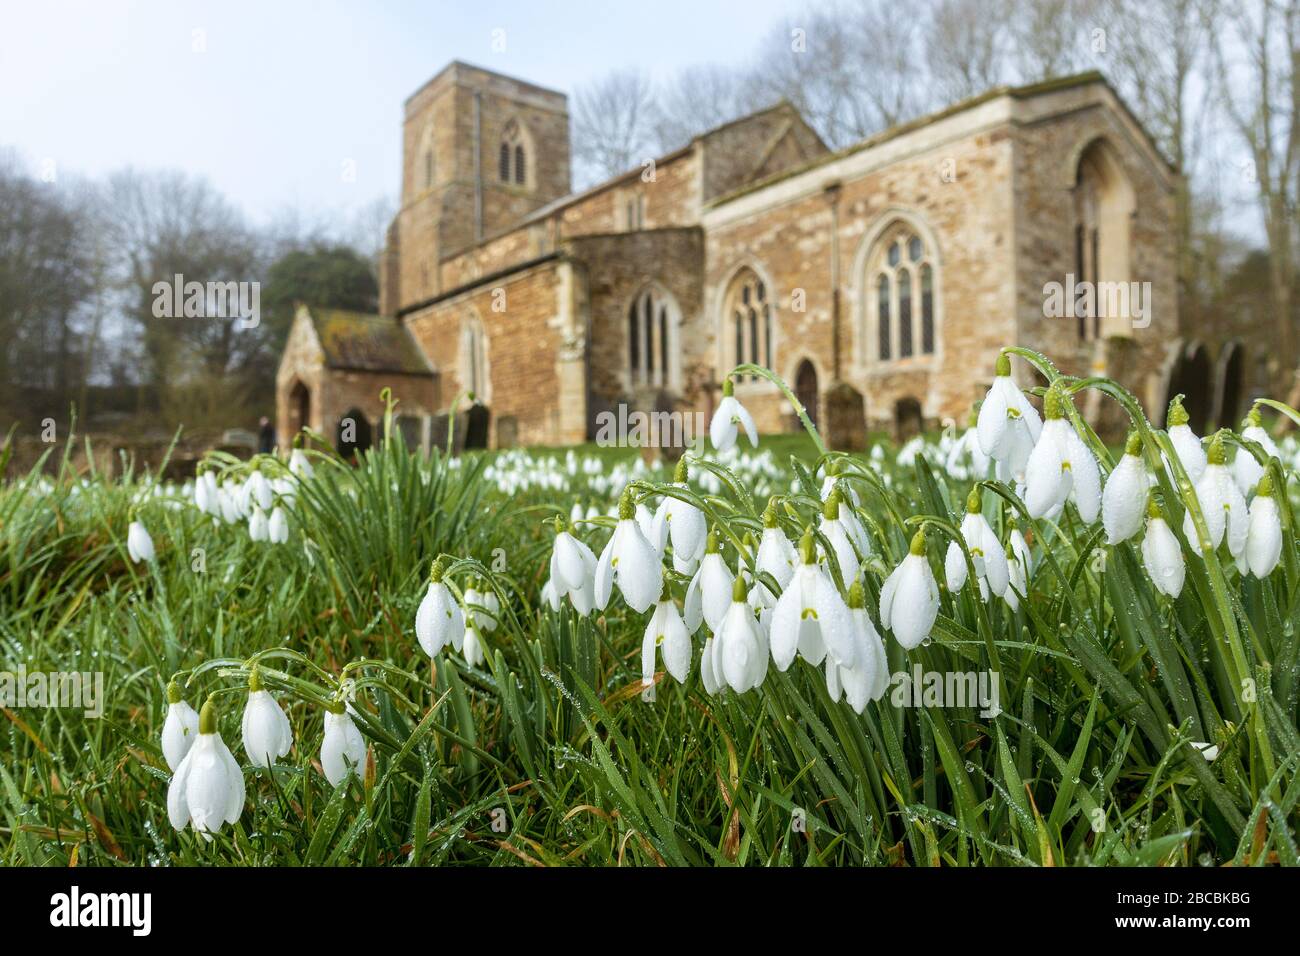 Snowdrops at the Church of St. Michael & All Angels, in Loddington, Leicestershire, England Stock Photo